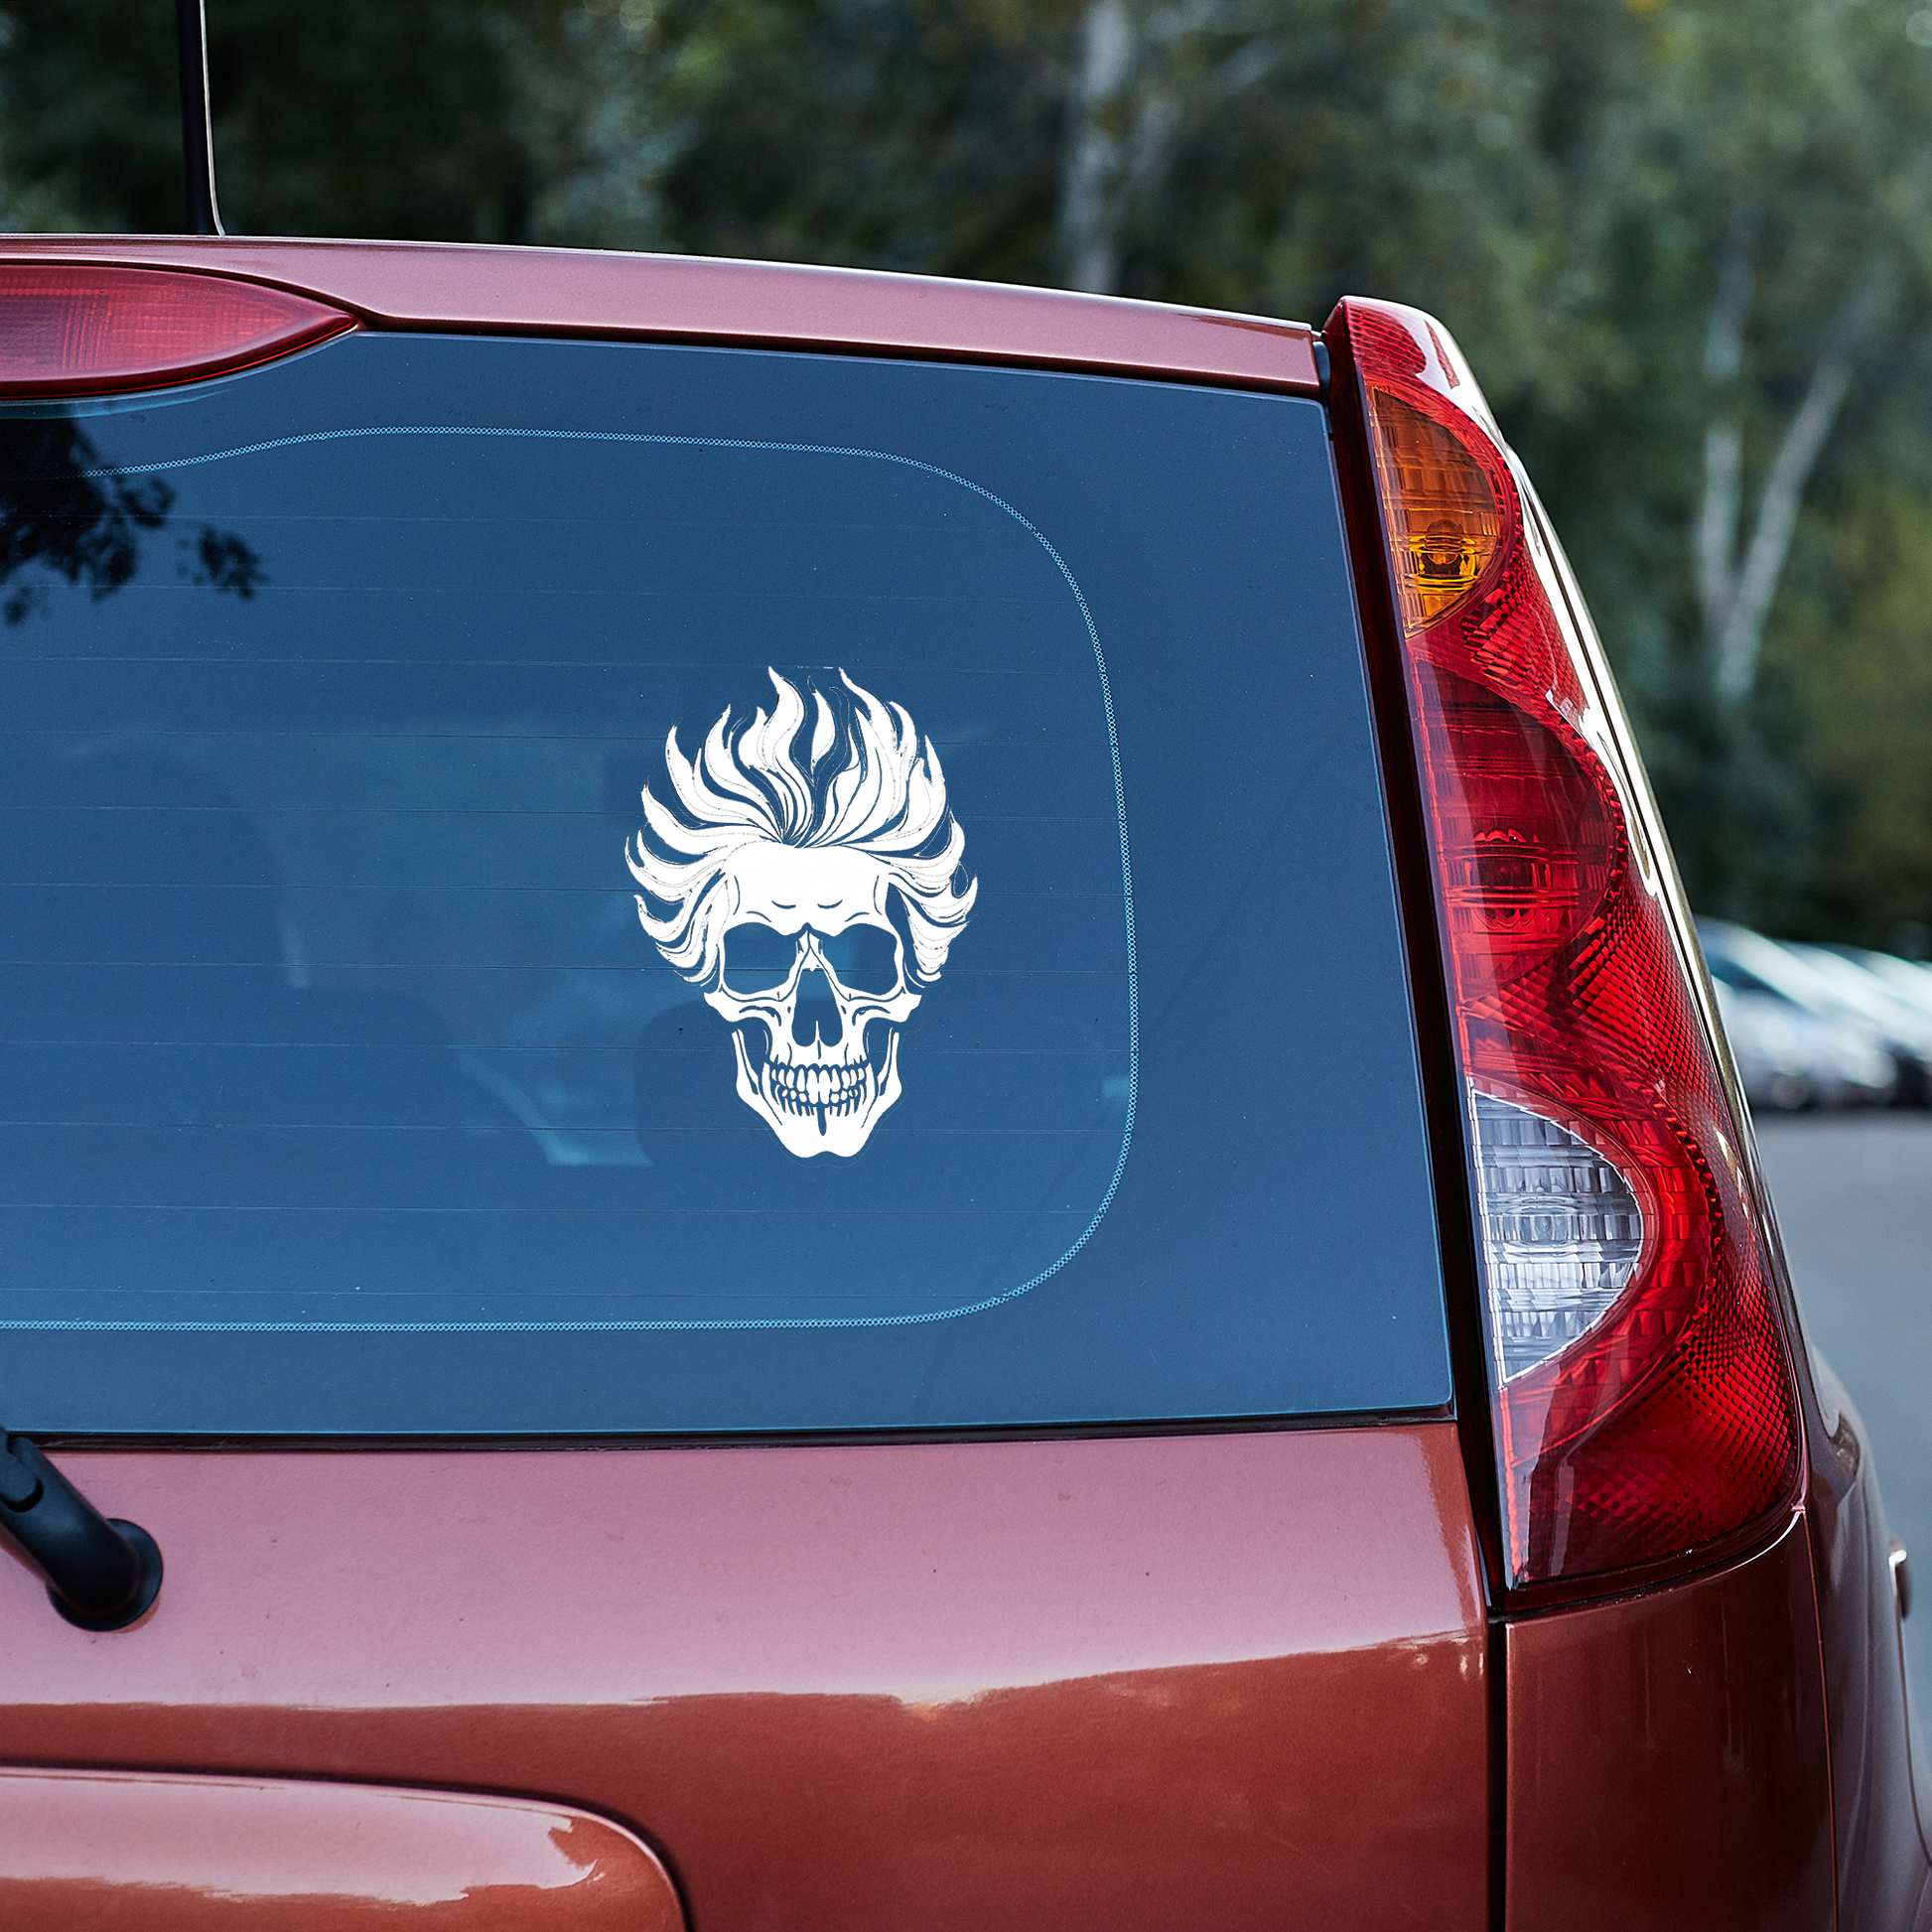 Flaming skull - Vinyl decal 2A boss gift car decor car lovers dads day gift dont tread on me gift for dad gift for grandpa gift for her gift for him gift for husband gift for mom gift for sister gift for wife liberty moms gift skull skull sticker Unique gift Vinyl Vinyl decals vinyl sticker Vinyl stickers window decal window sticker